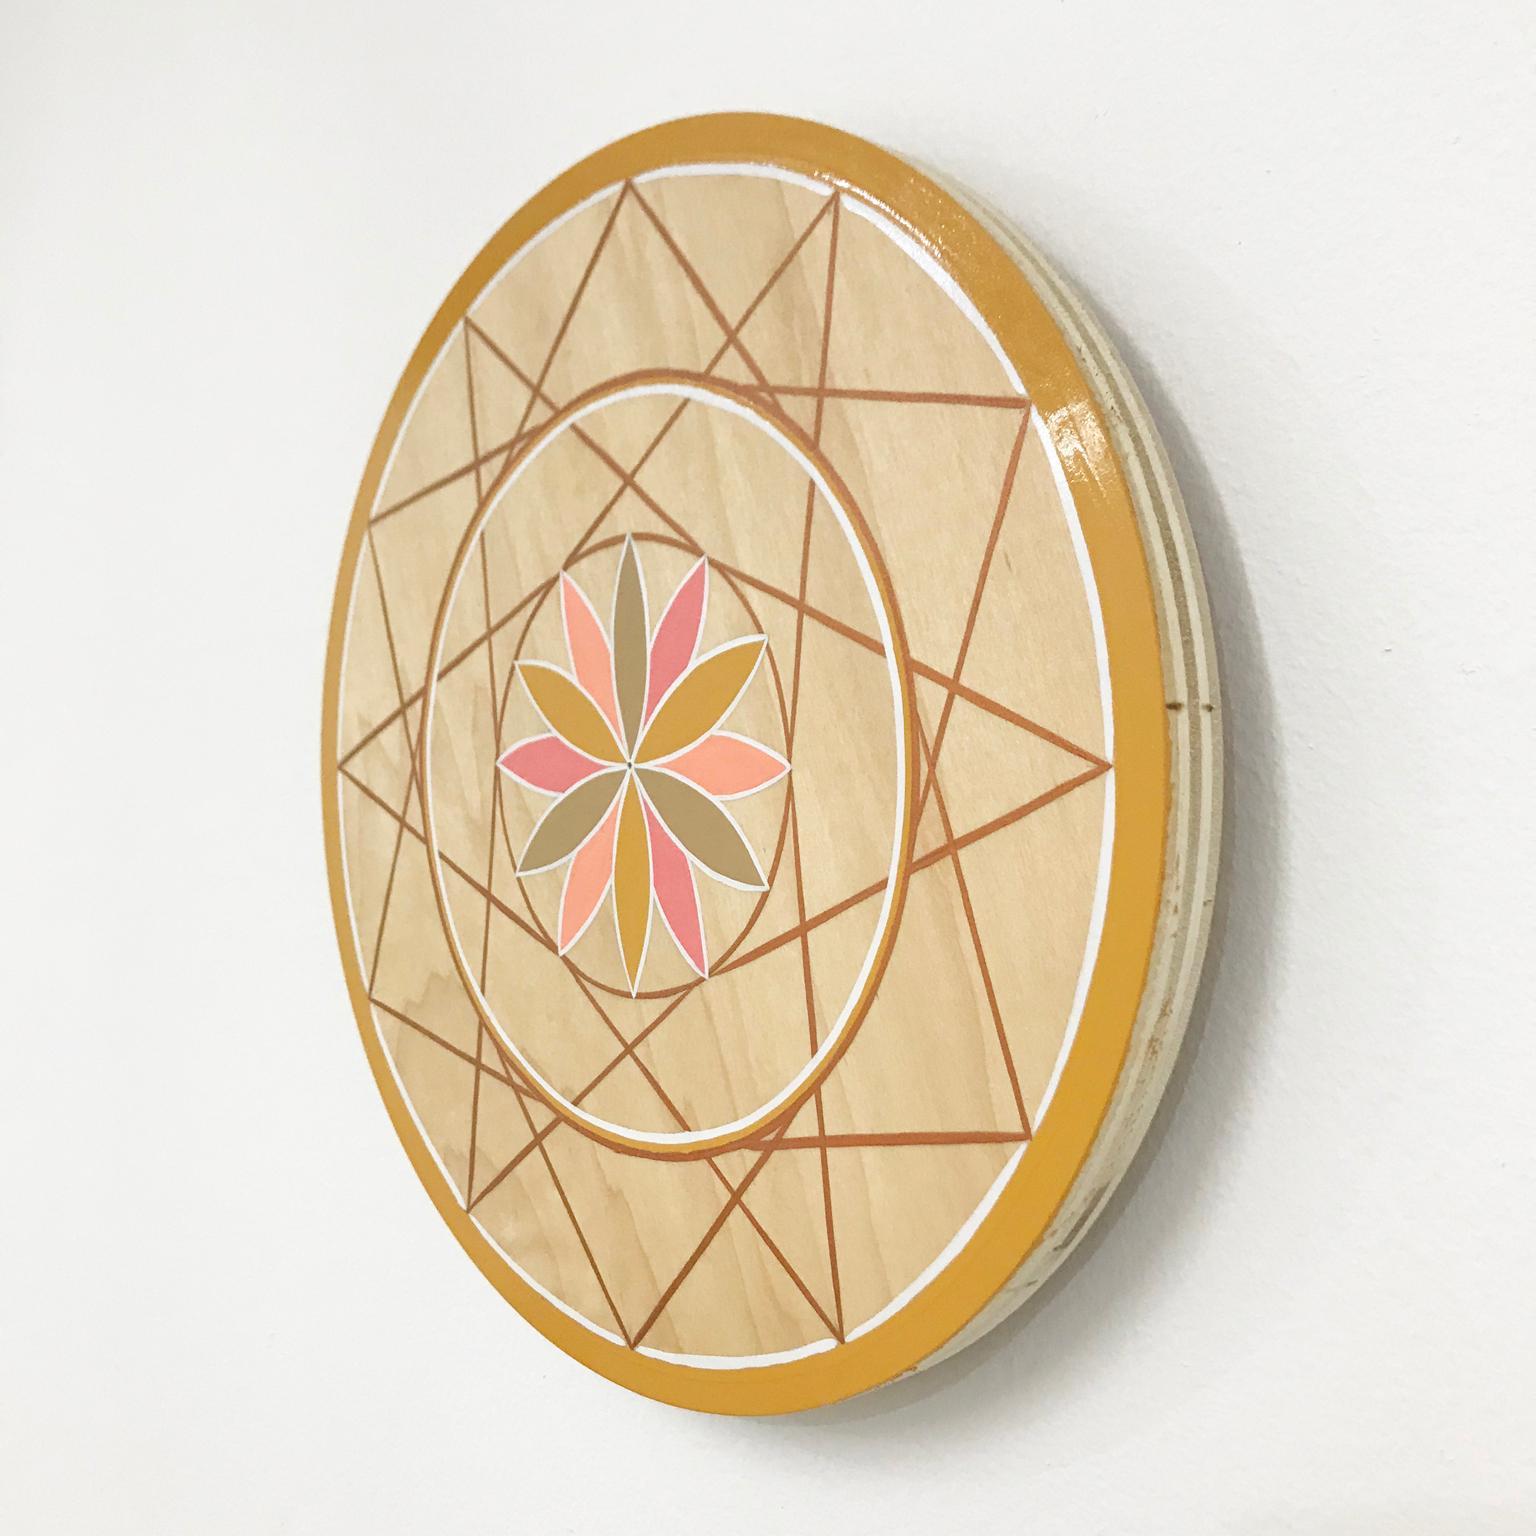 This wall hanging by Scott Chasse is adorned with a hand-painted pink, peach and gold toned design rooted in the sacred geometry of the flower of life. 

One-shot enamel hand-painted on plywood

Measures: 11.75” diameter, painted on 3/4” plywood